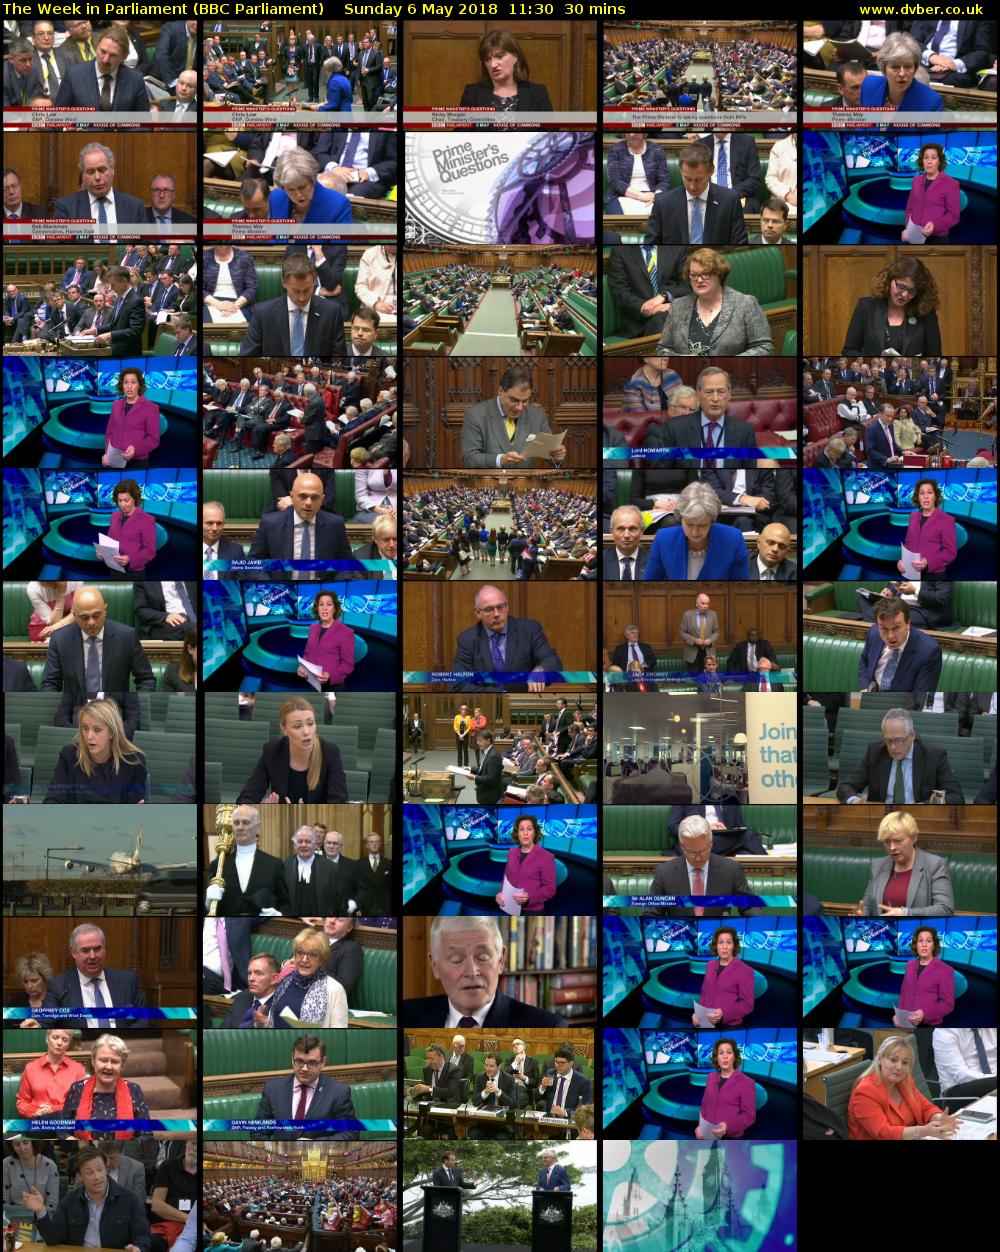 The Week in Parliament (BBC Parliament) Sunday 6 May 2018 11:30 - 12:00